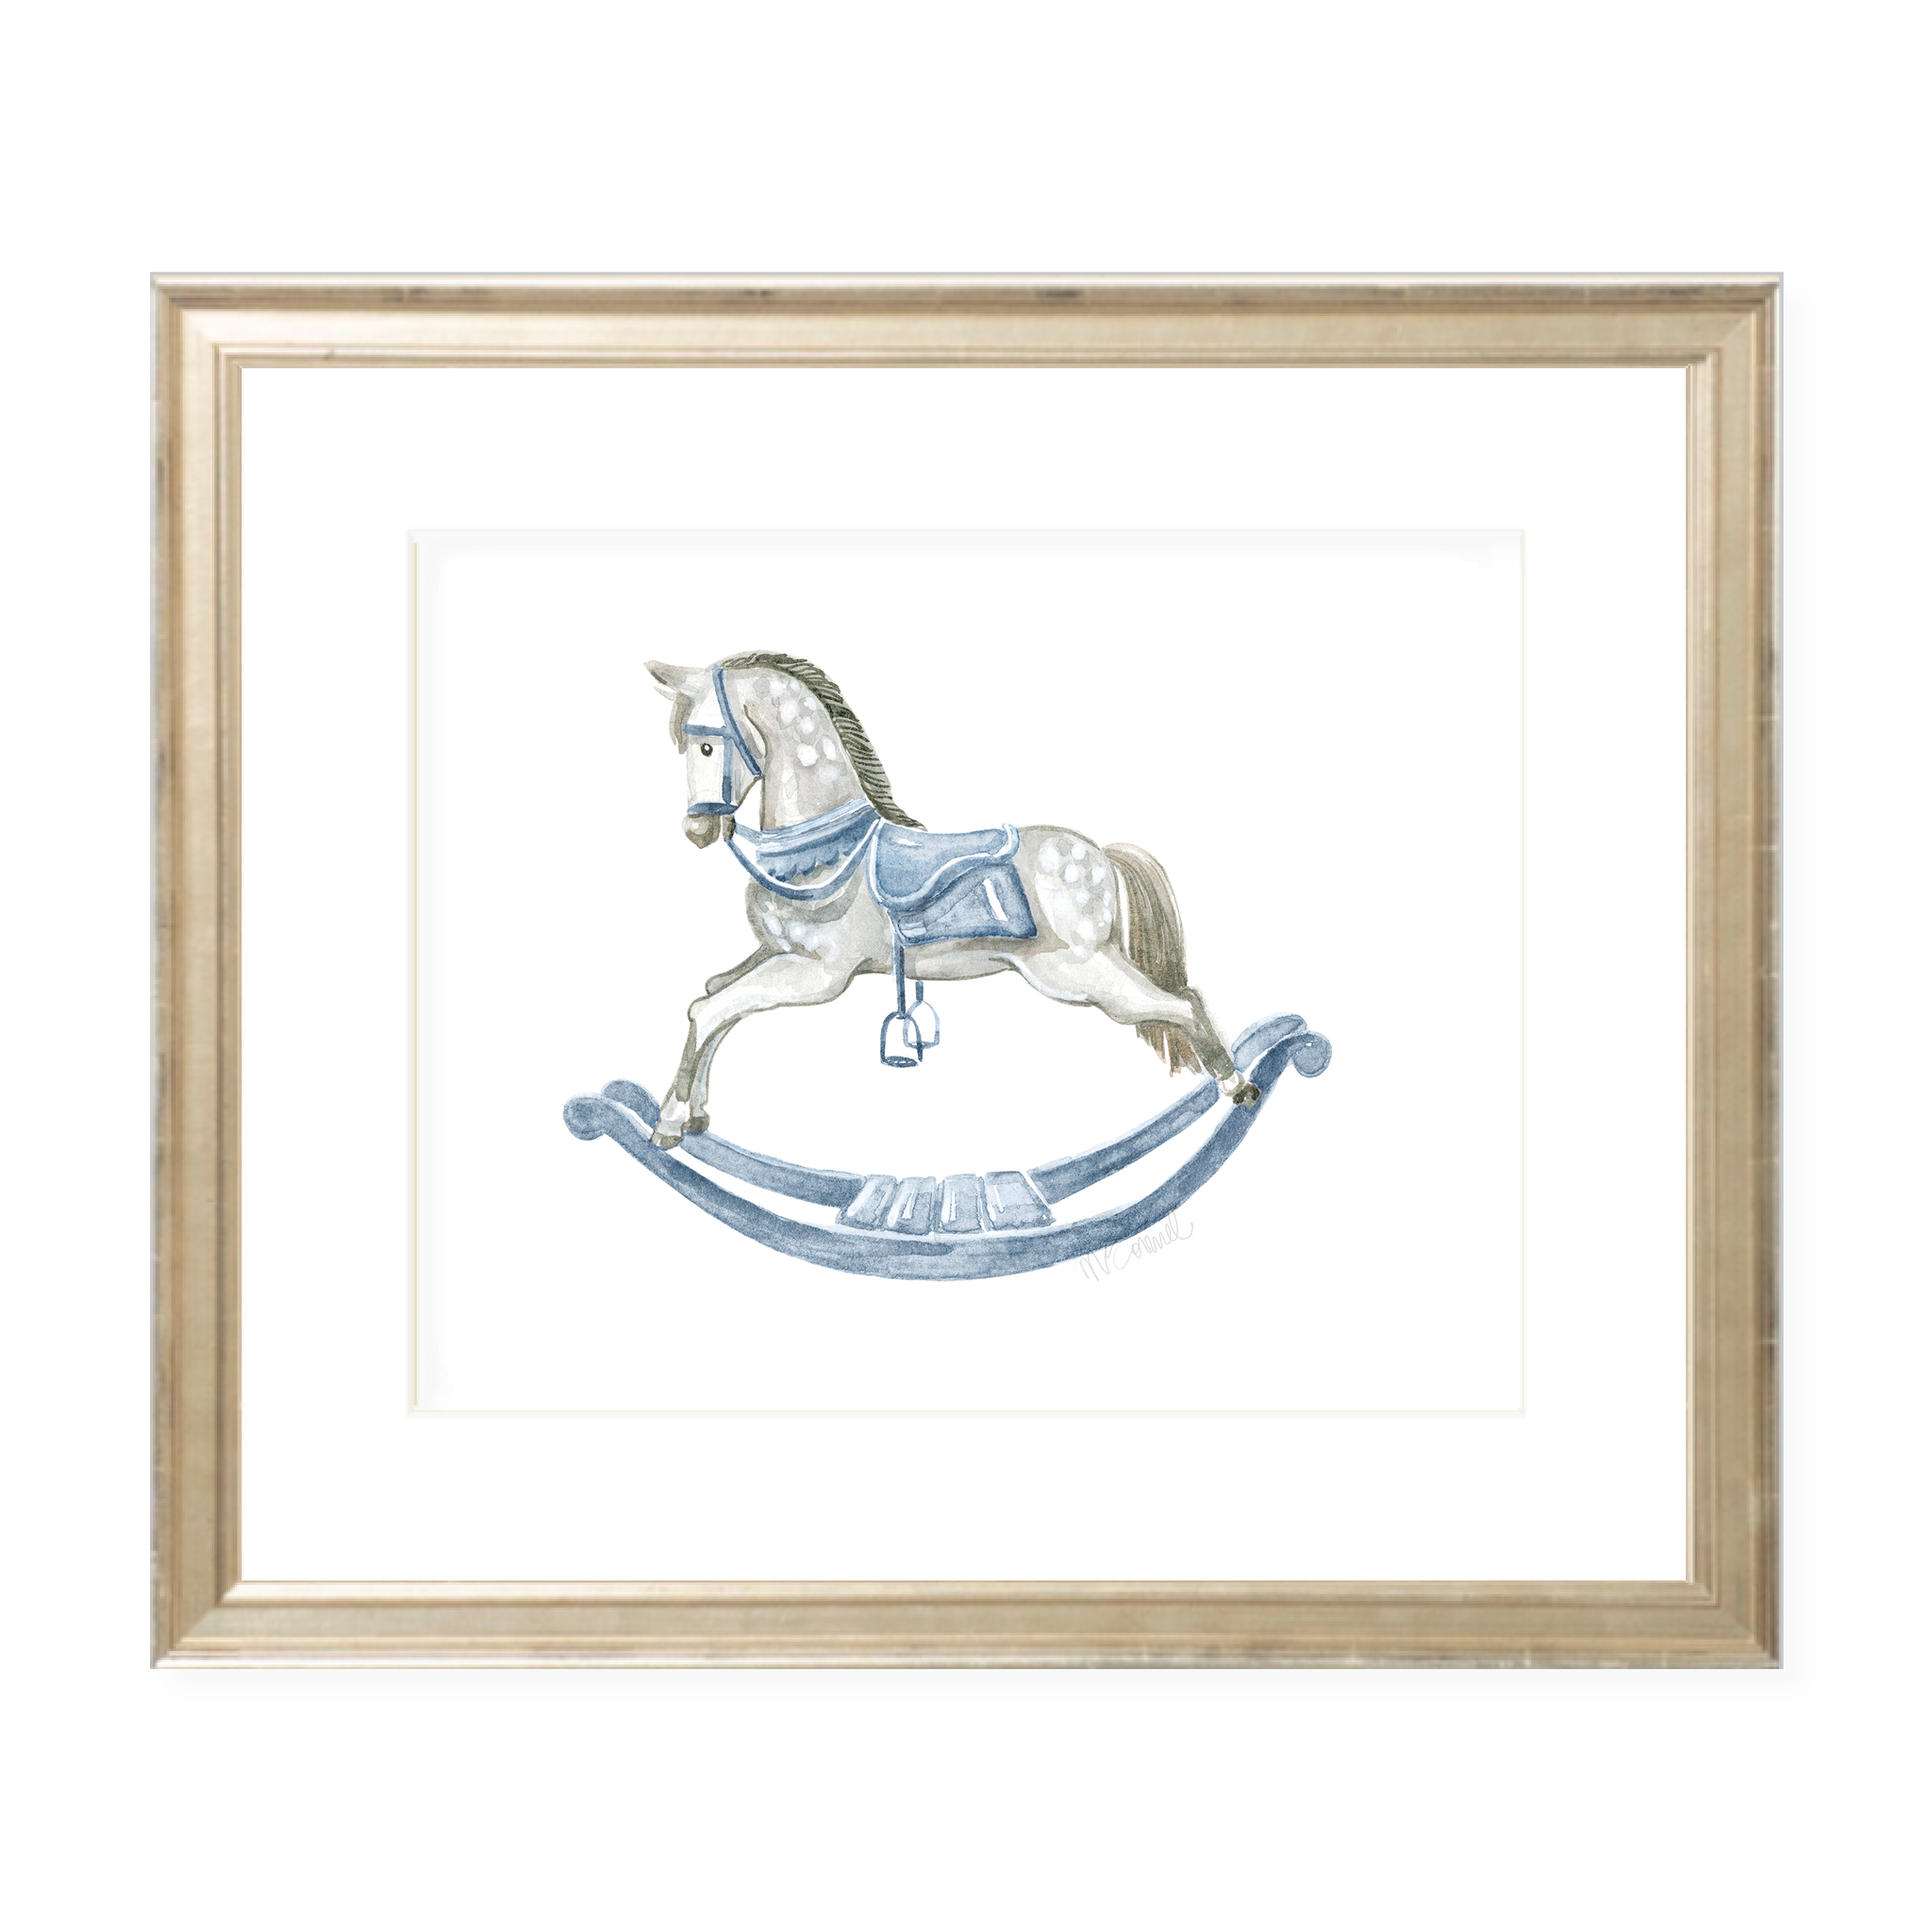 Ridley the Rocking Horse Landscape Watercolor Print